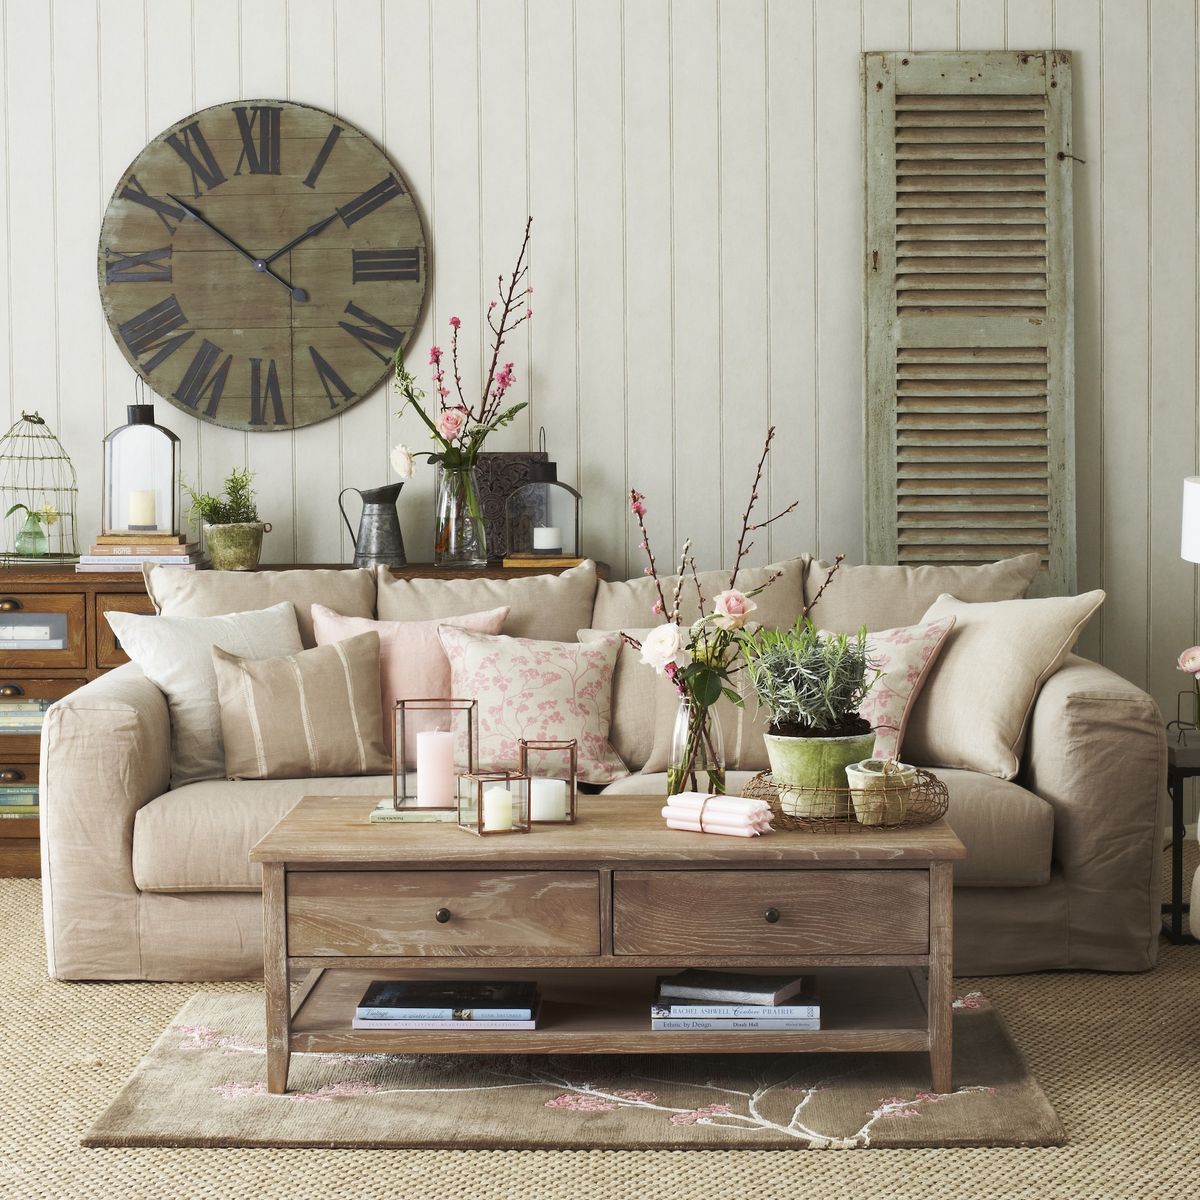 12 Use a neutral palette to highlight rustic features